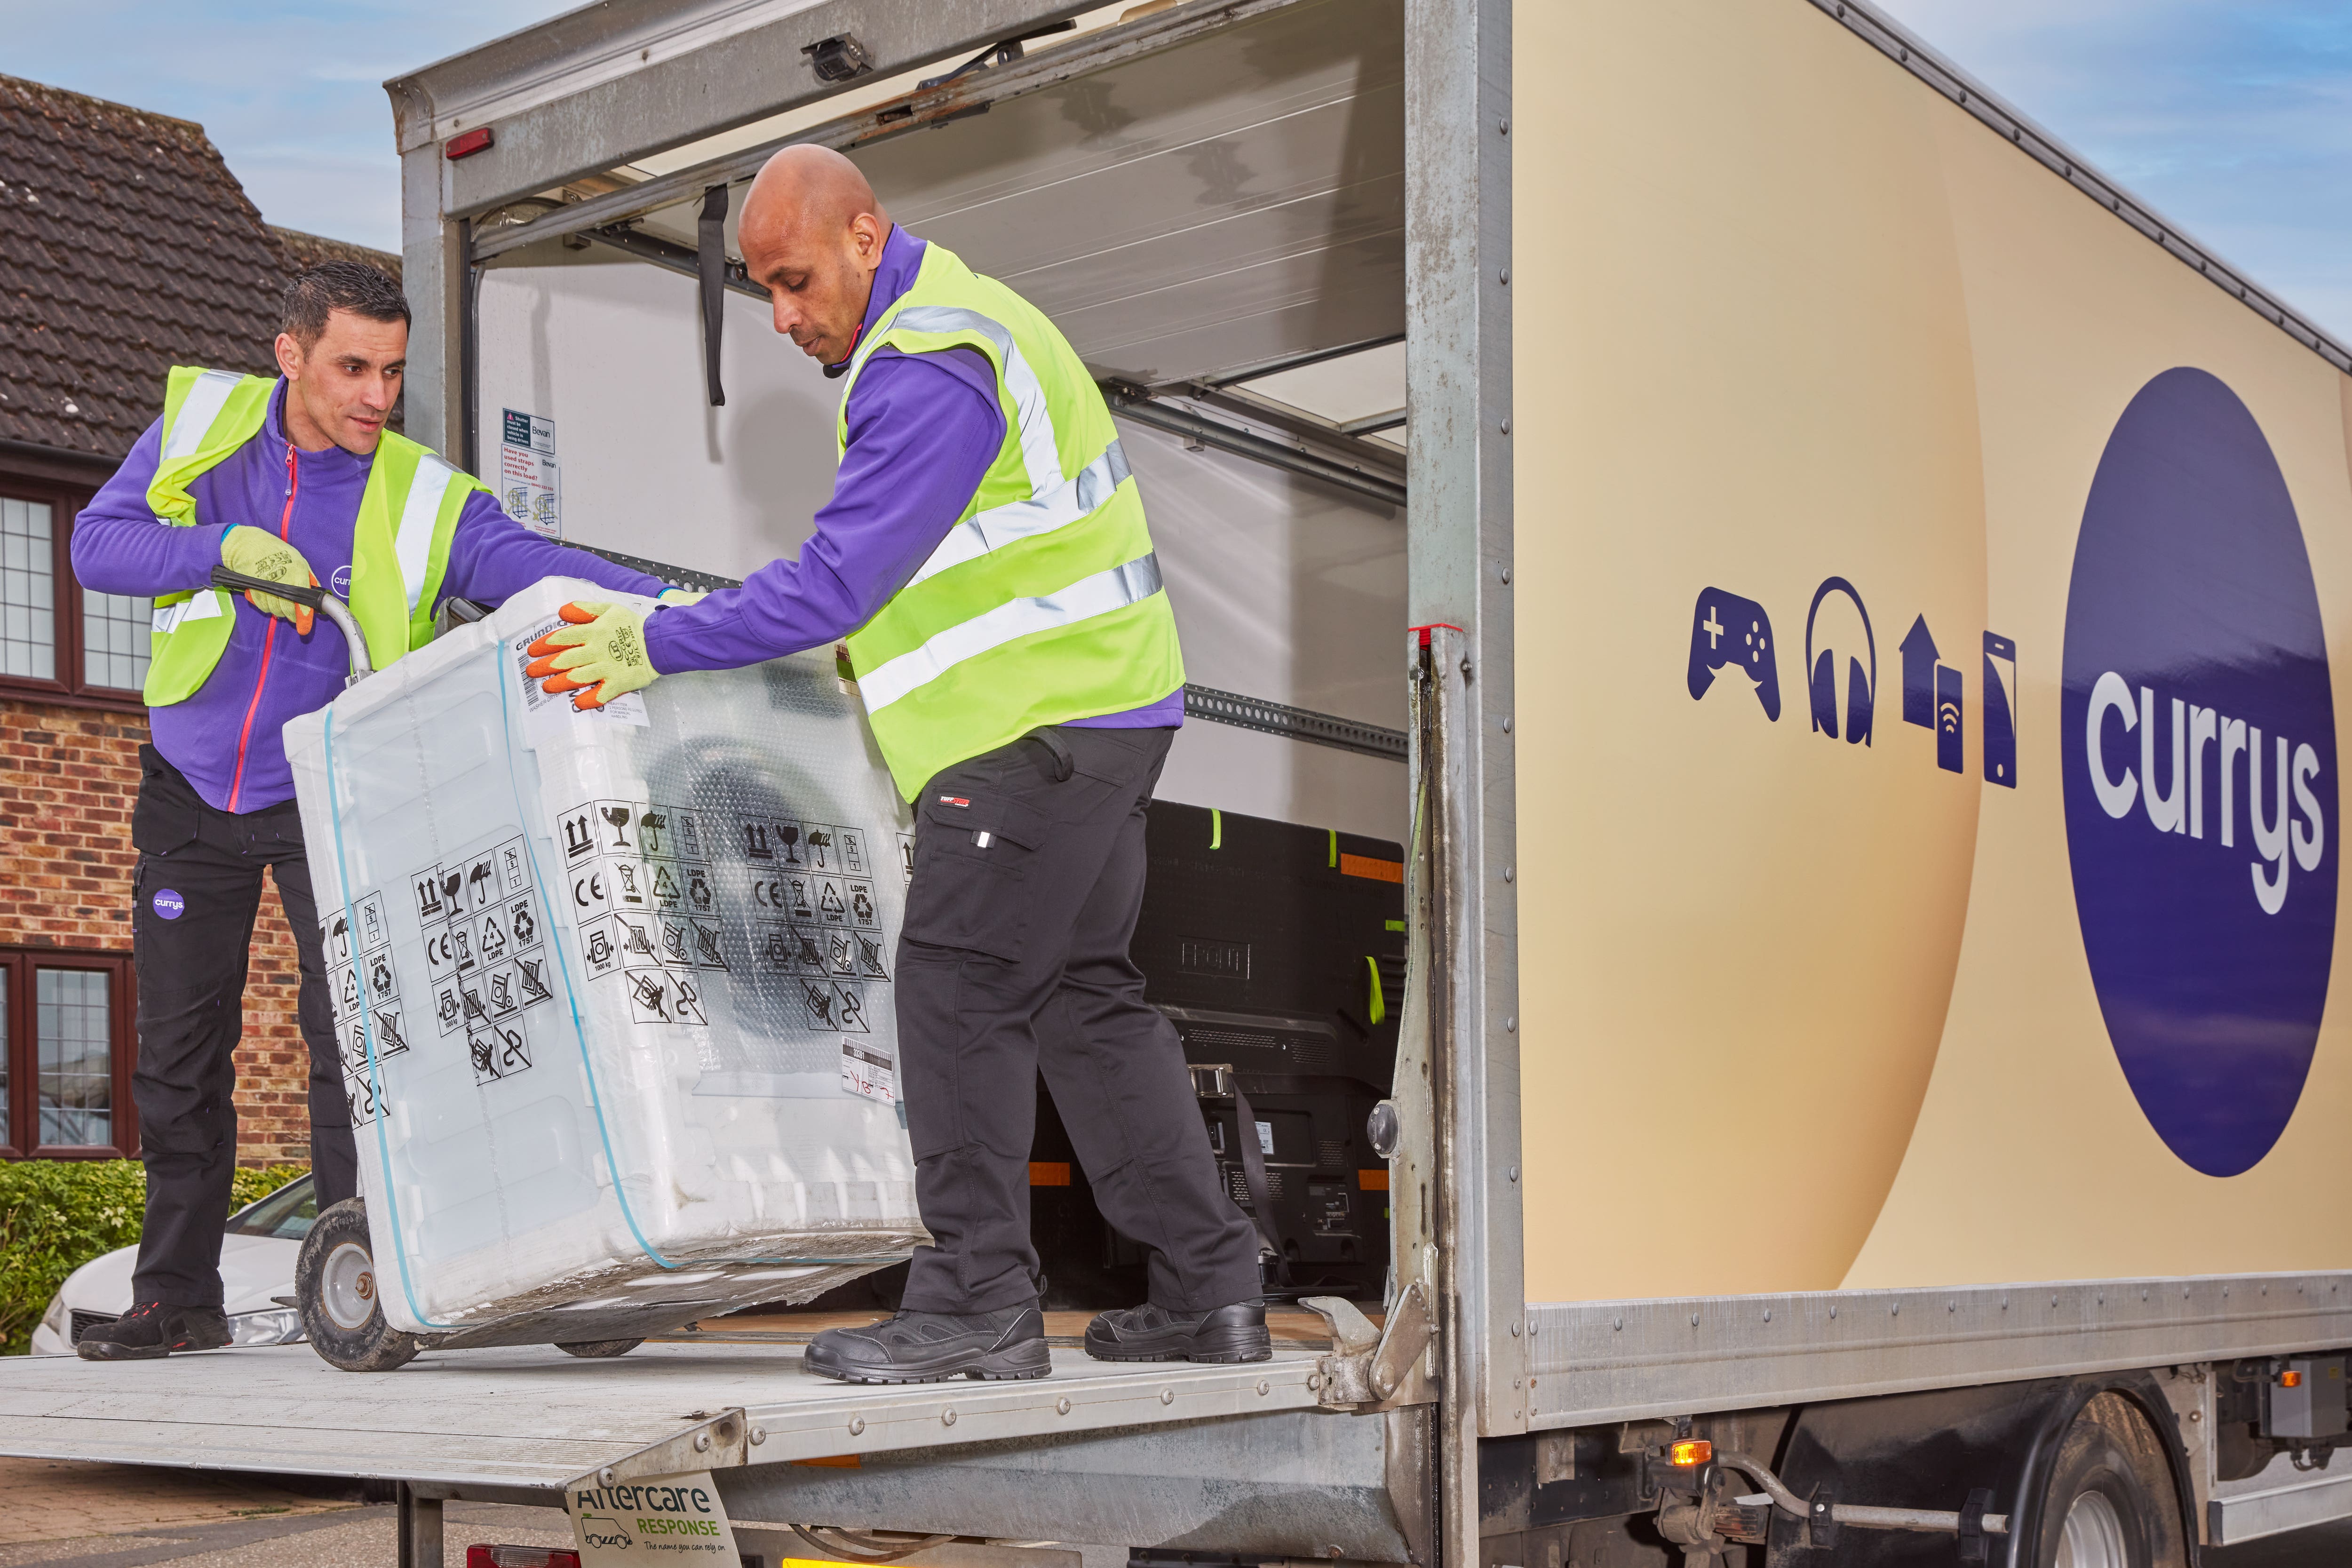  Two men in purple work uniforms unload a large box labelled 'aftercare response' from the back of a Currys delivery truck, with the text 'Currys' and images of gaming consoles and headphones on the side of the truck.